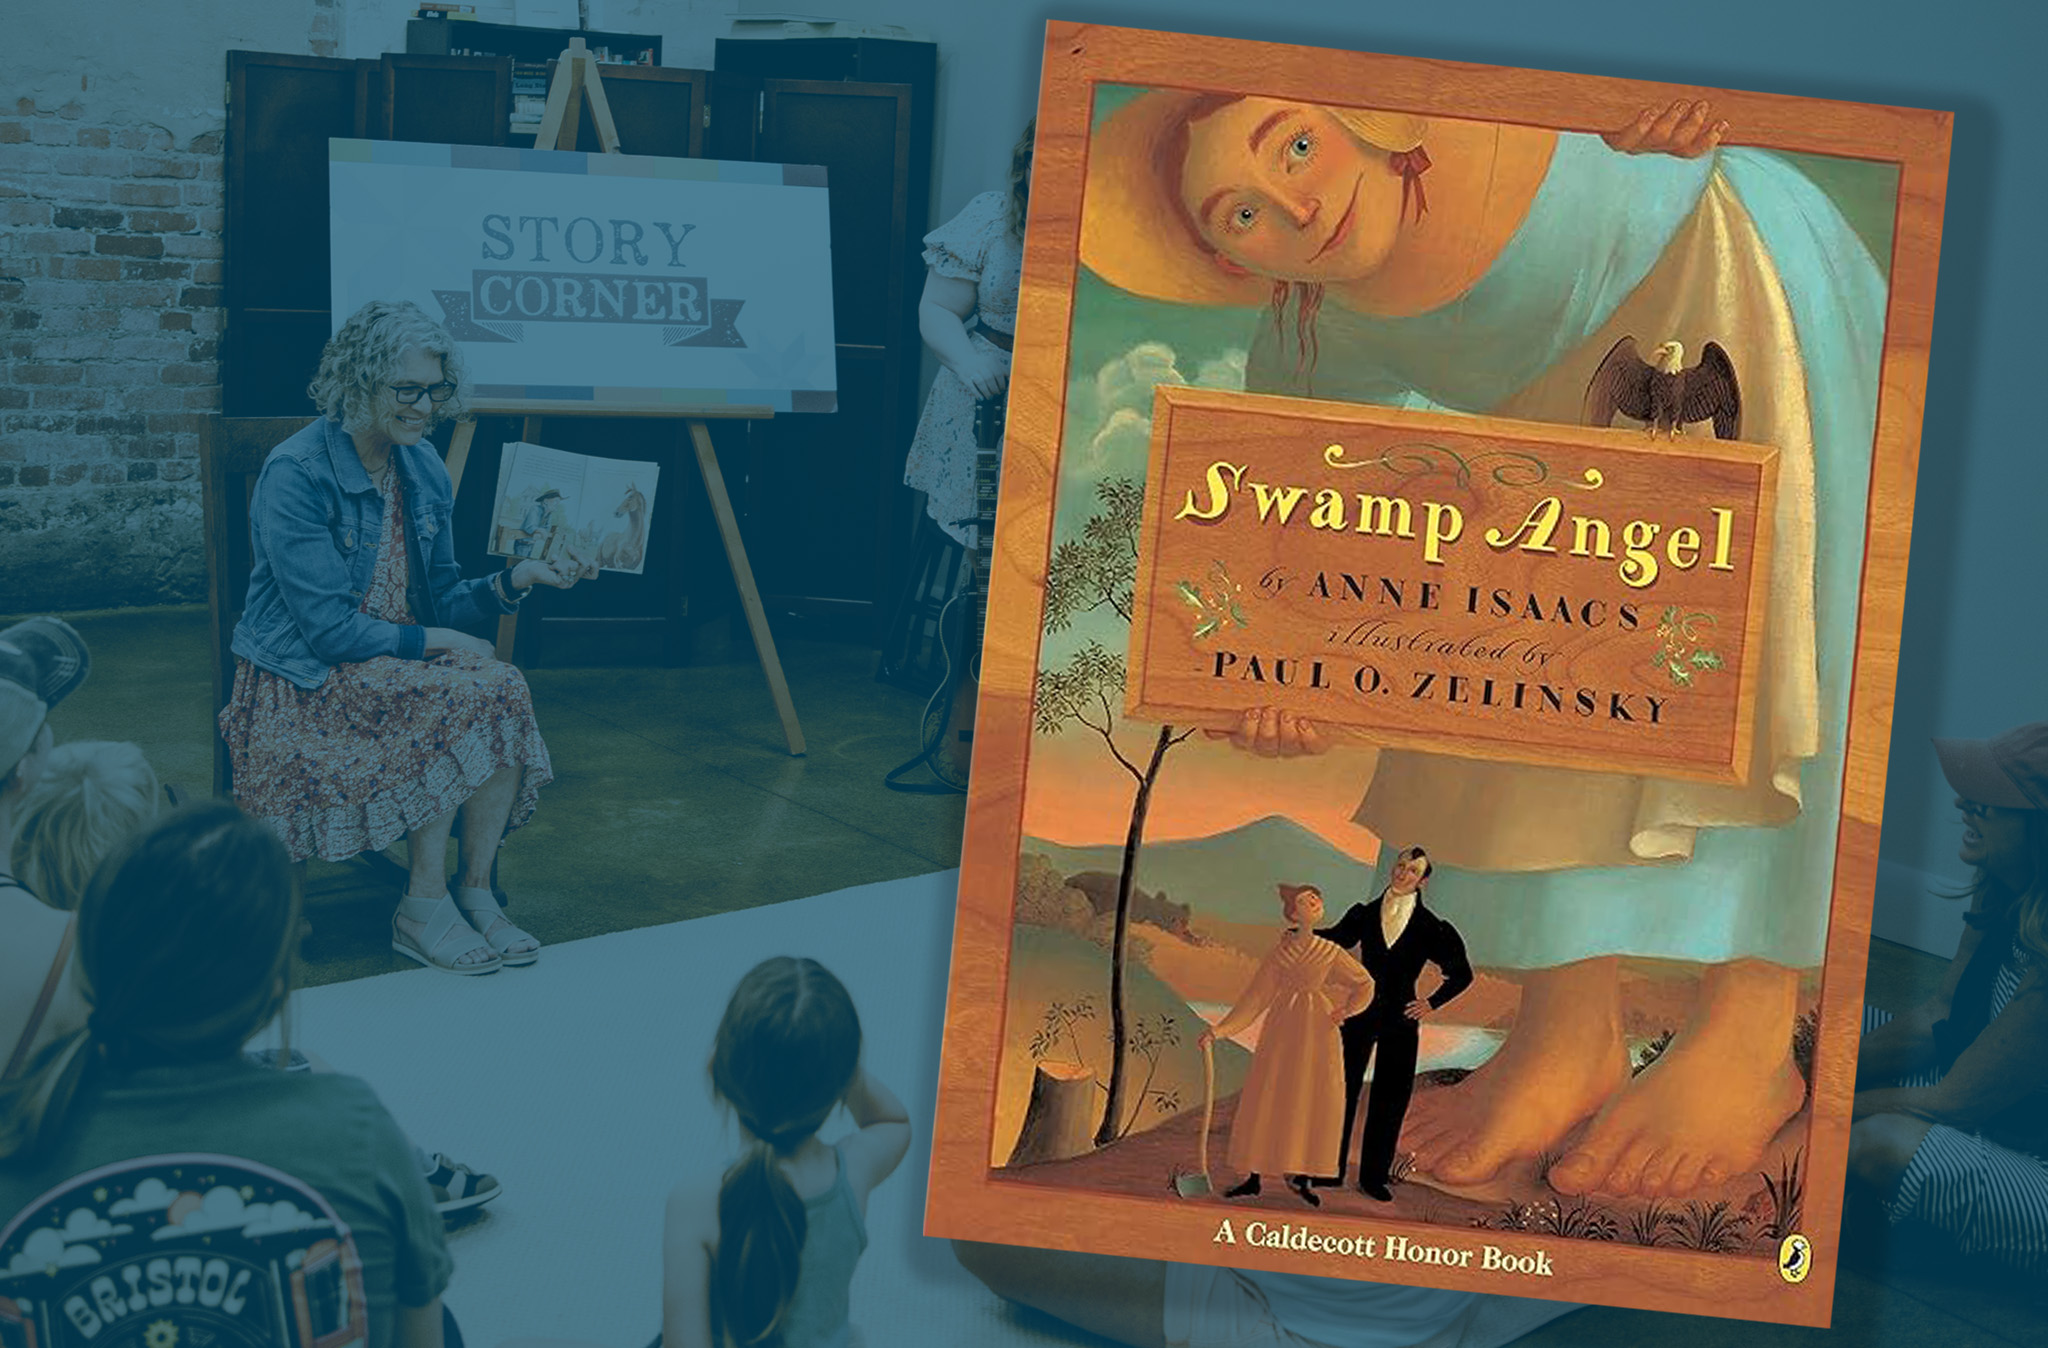 Museum Story Time – “Swamp Angel” by Anne Isaacs